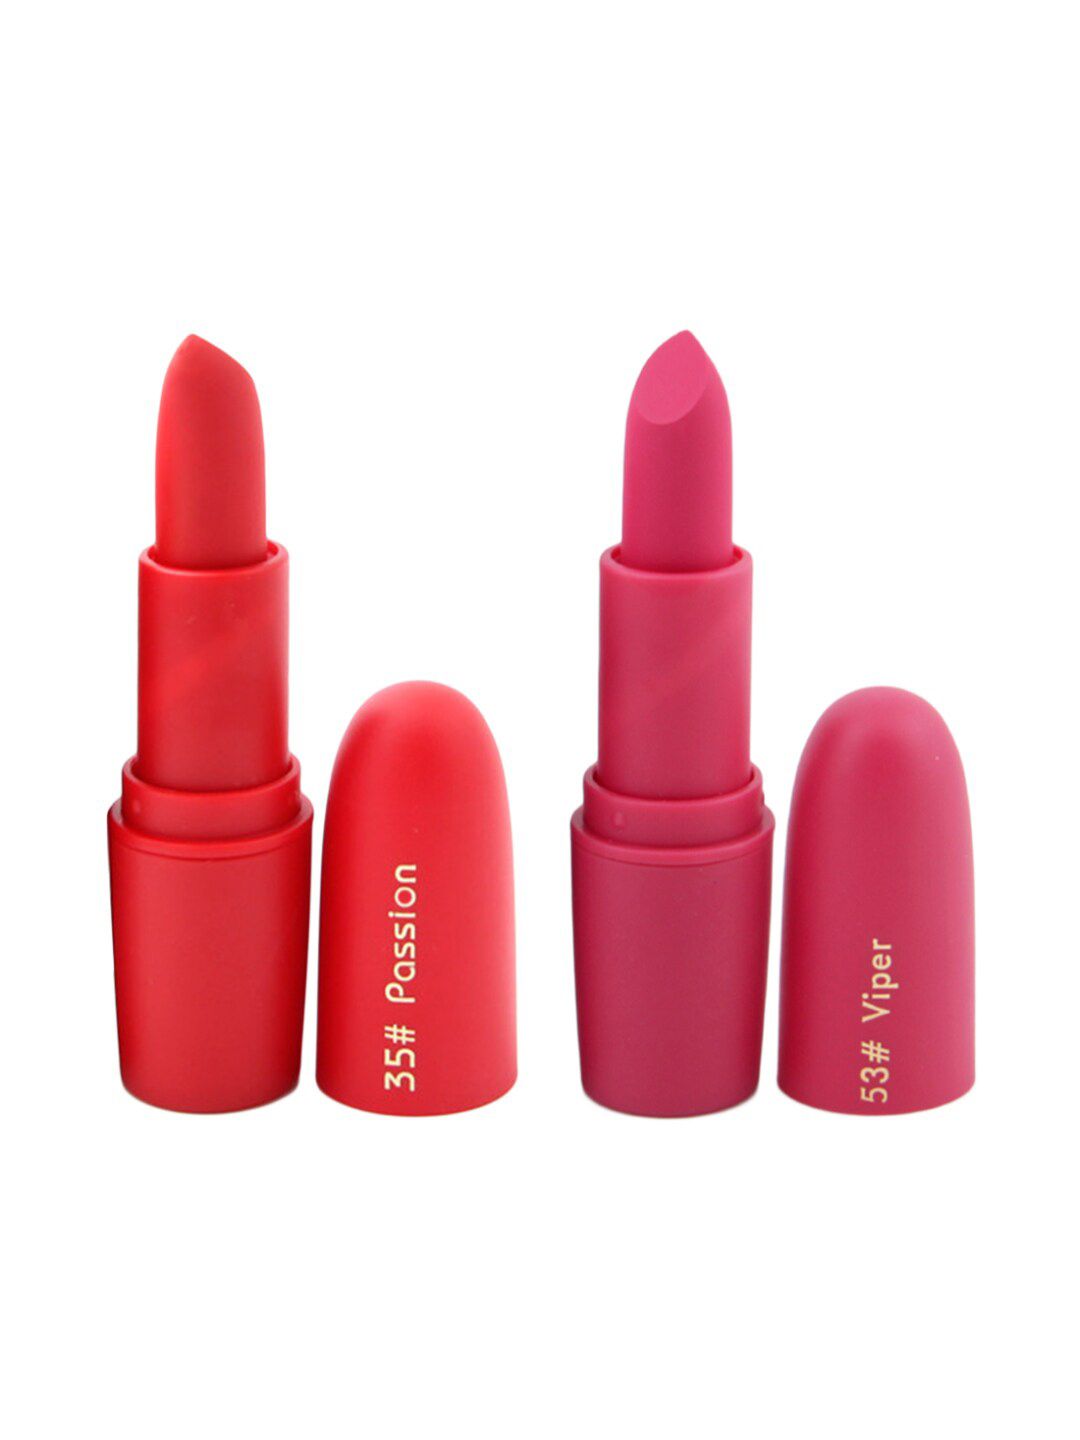 MISS ROSE Professional Make-Up Set of 2 Matte Creamy Lipsticks - Passion 35 & Viper 53 Price in India